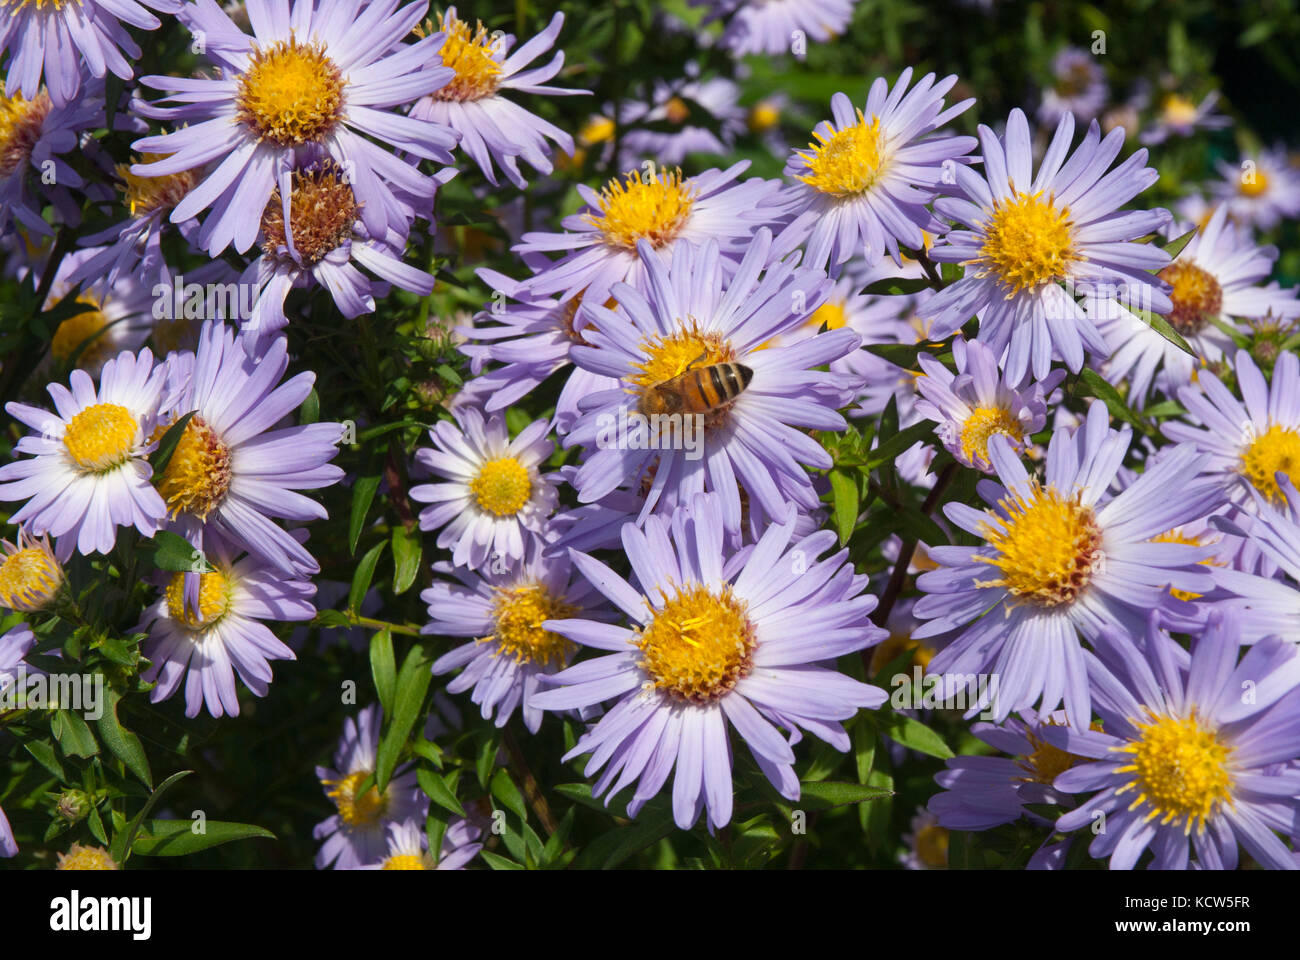 Clusters of colourful purple/ mauve asters (Michaelmas daisies) growing in sunshine, visited by honey bees. Stock Photo